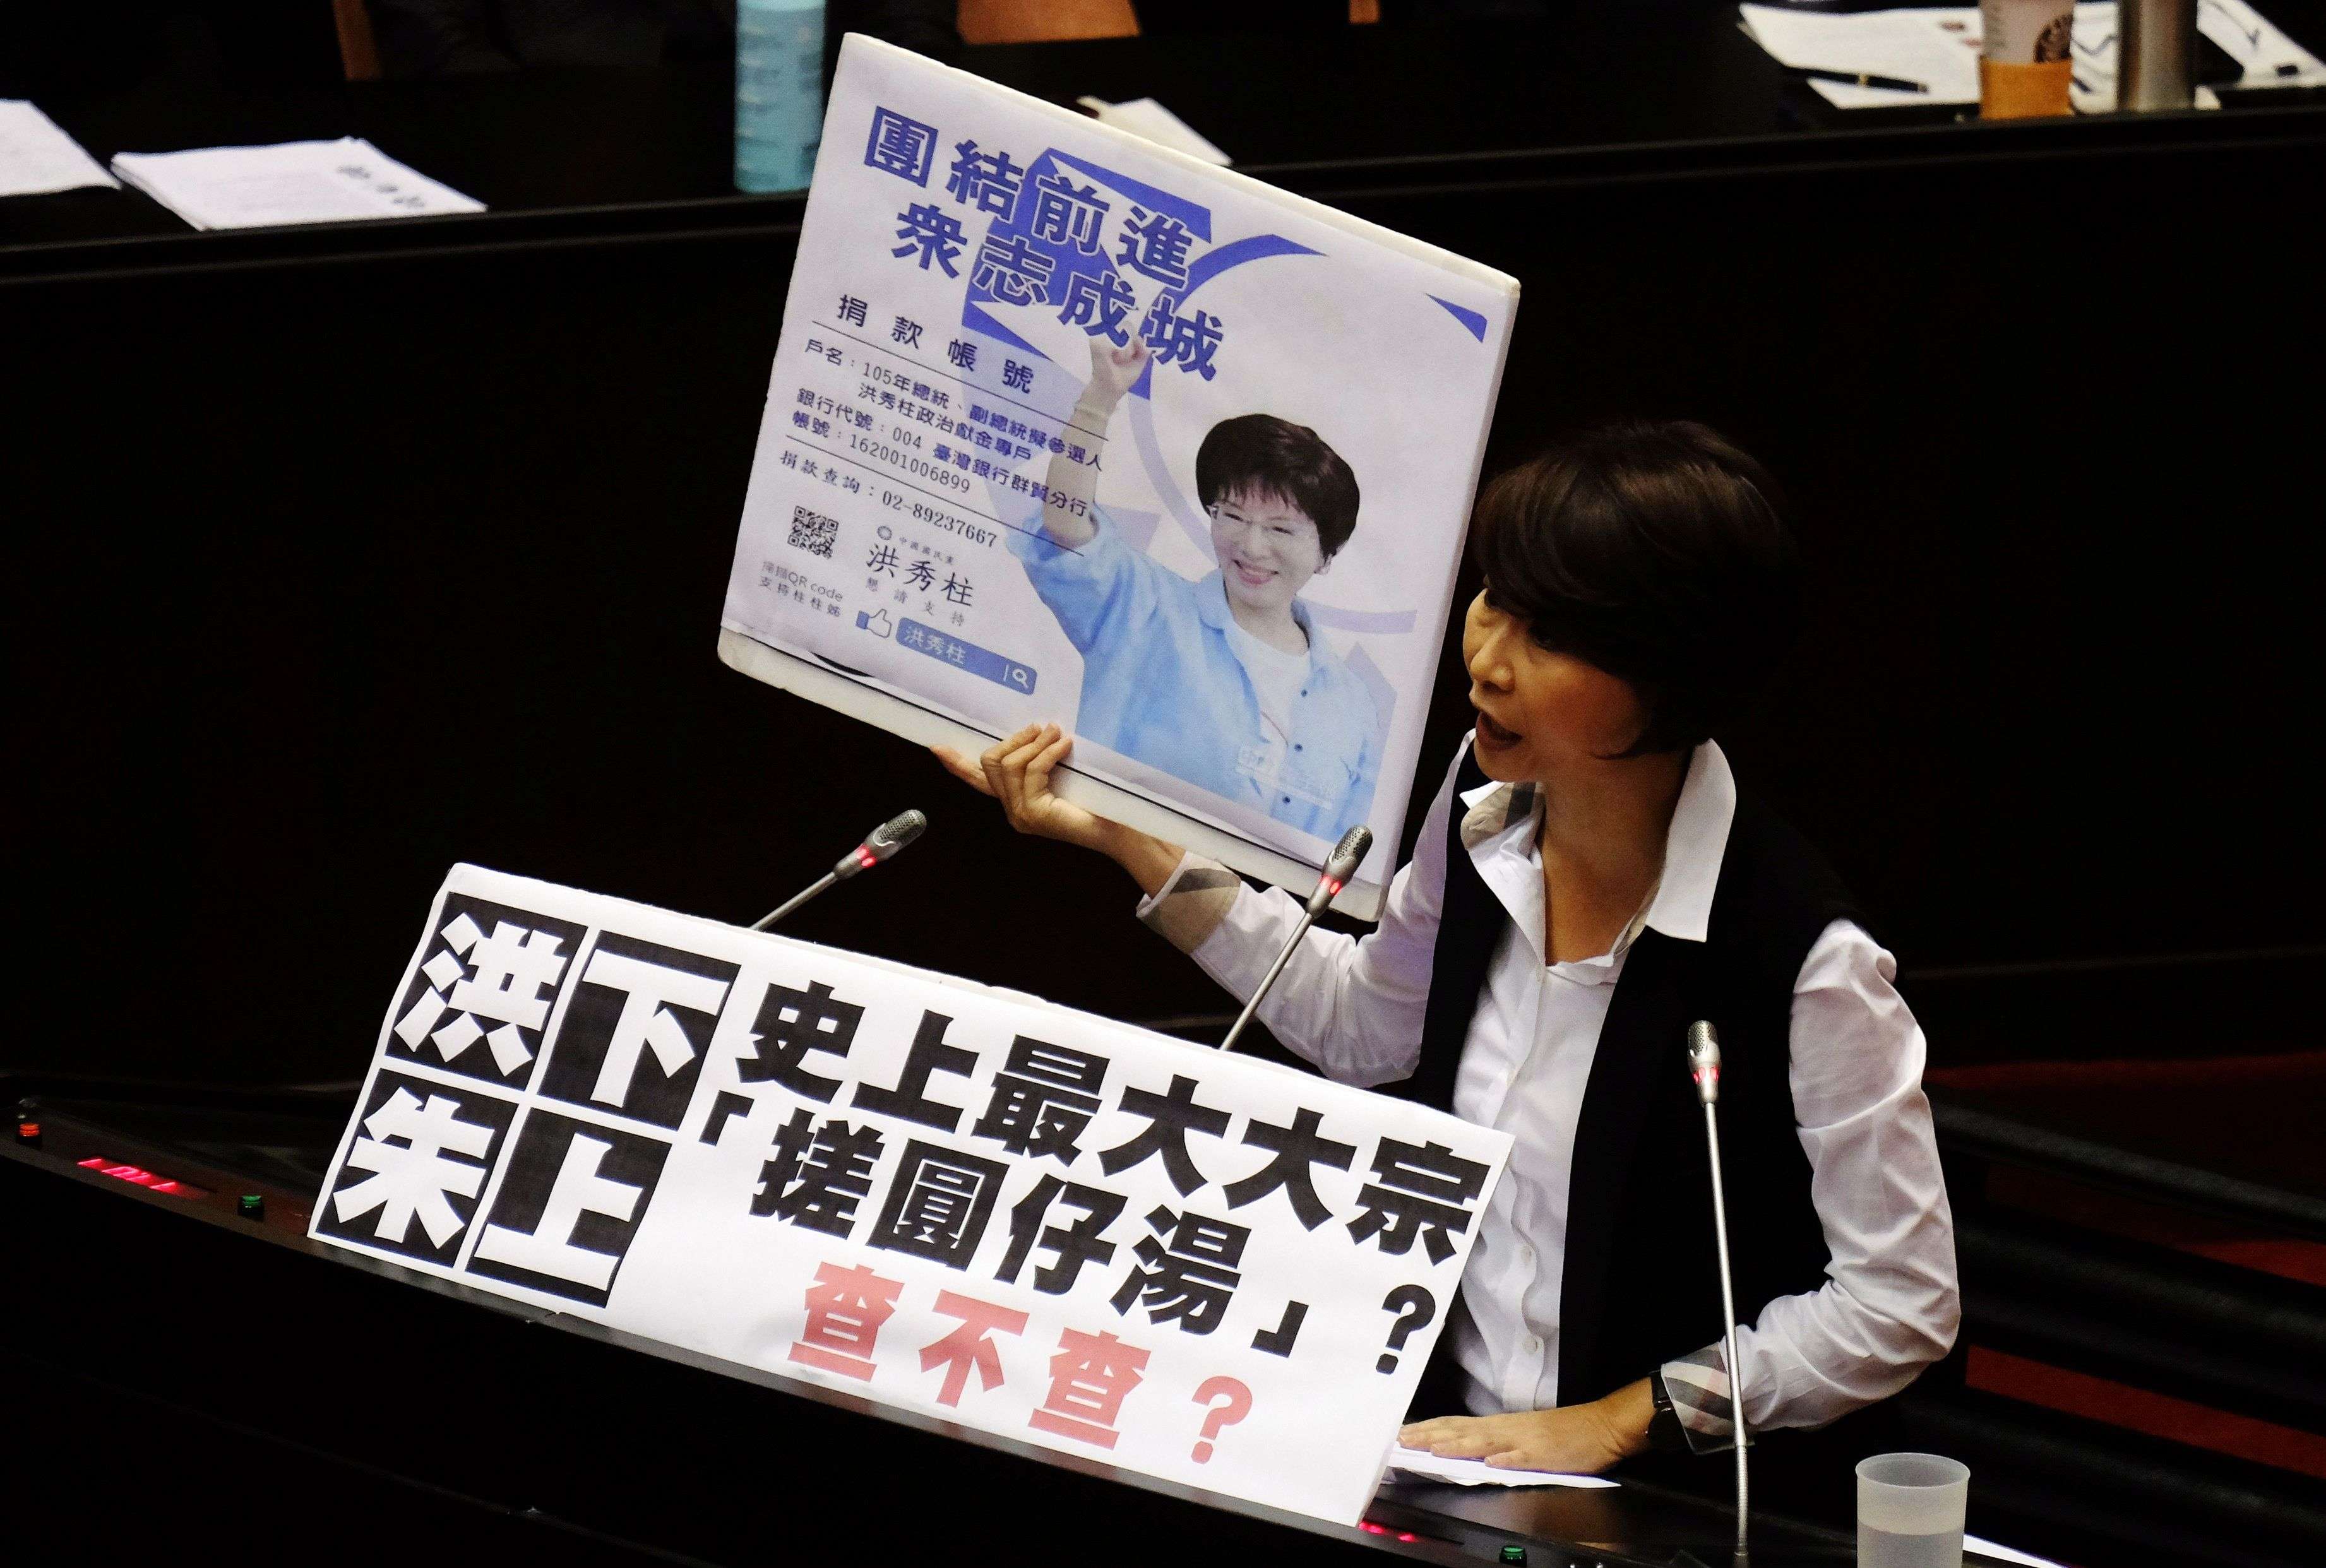 A poster of Hung Hsiu-chu, a presidential candidate from the ruling Kuomintang (KMT) (Photo courtesy: AFP/Sam Yeh)